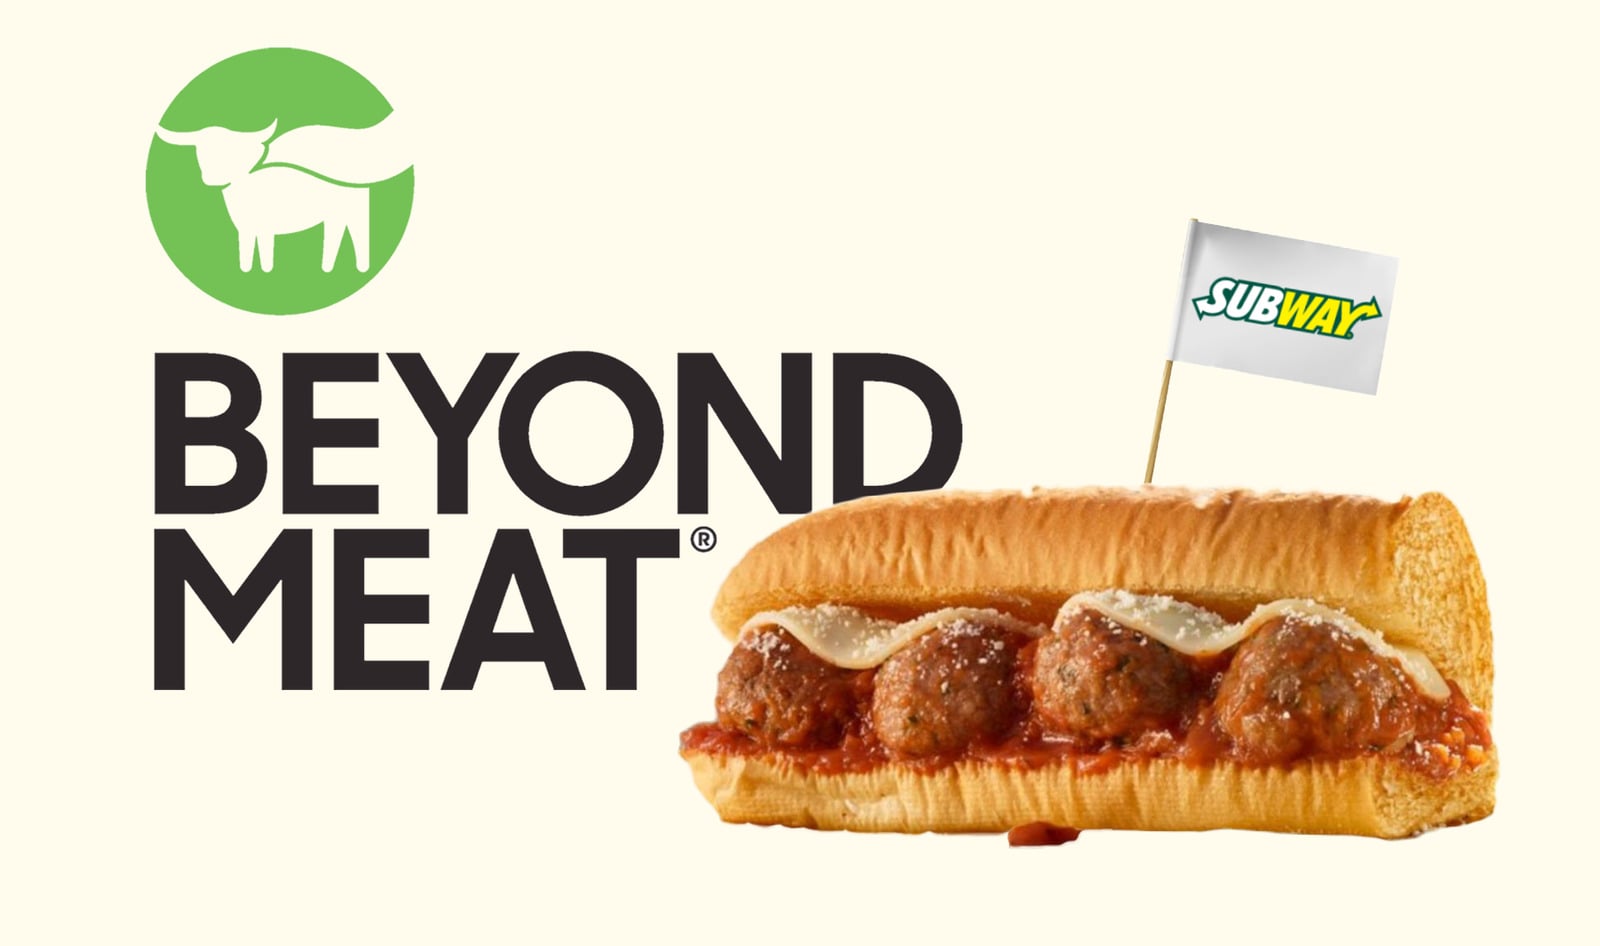 Subway Launches Beyond Meatball Sandwich Across US and Canada